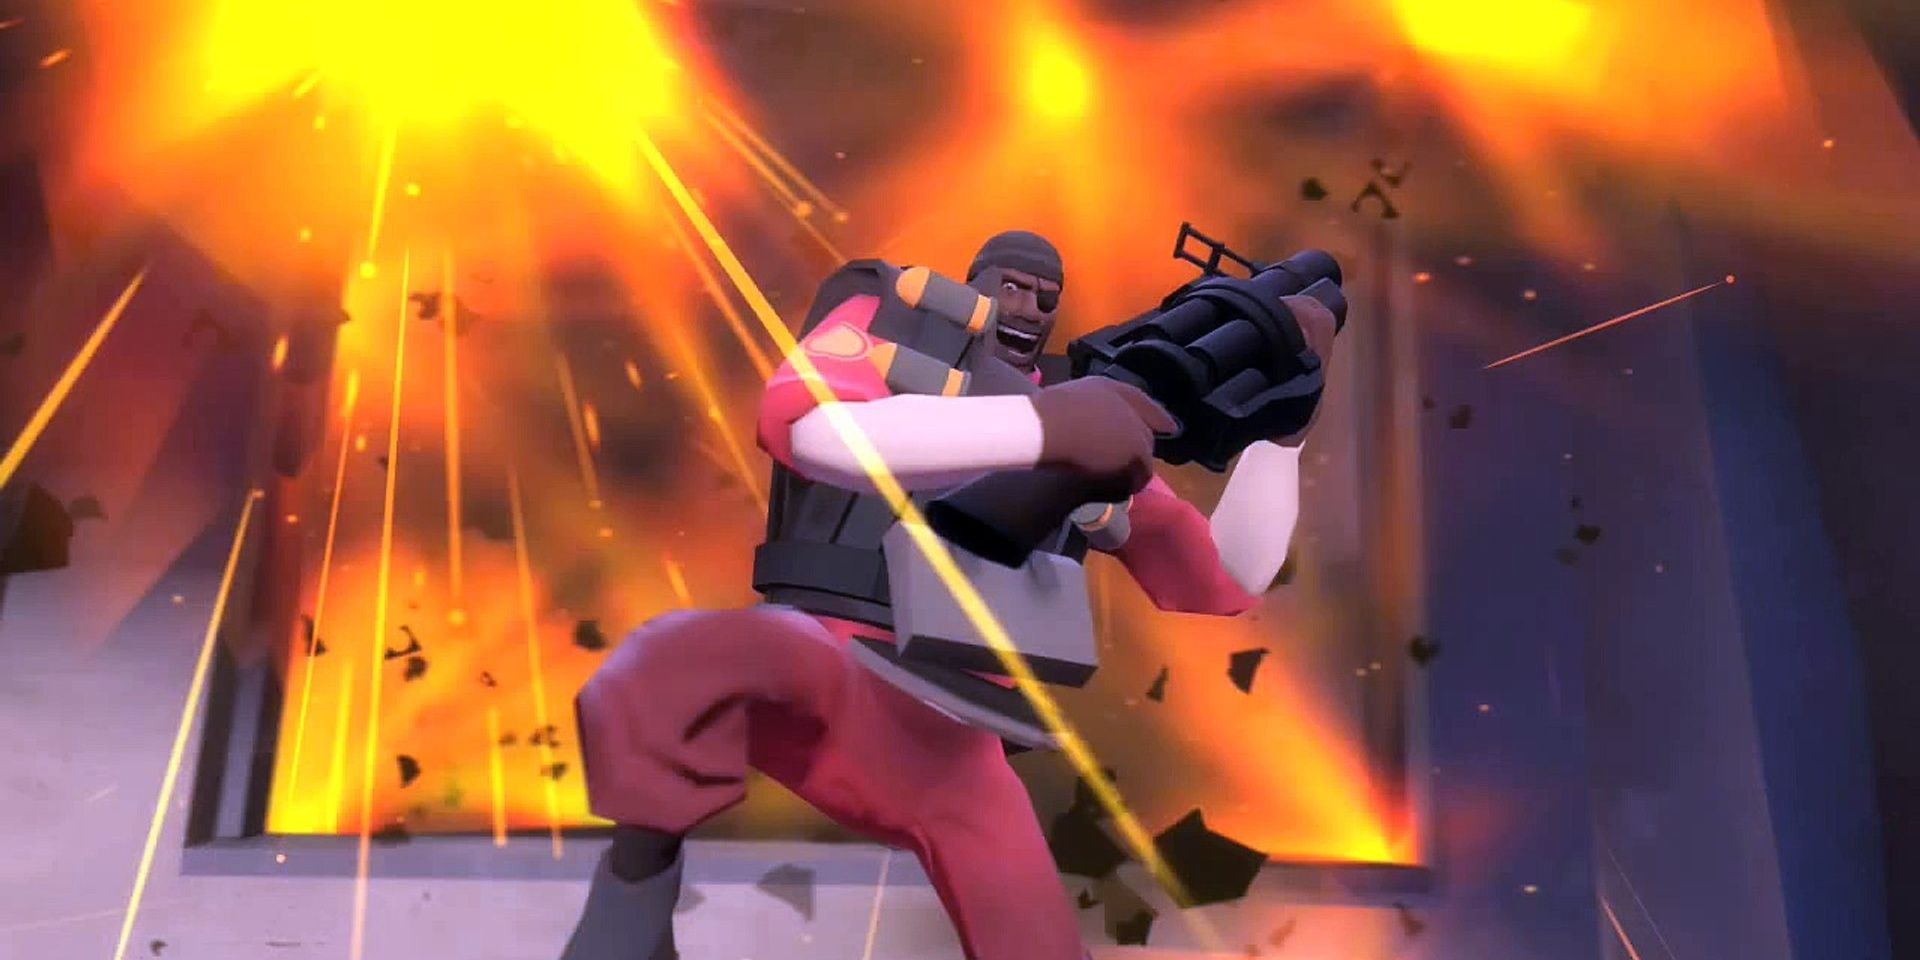 The Demoman jumping away from explosions in meet the Demoman